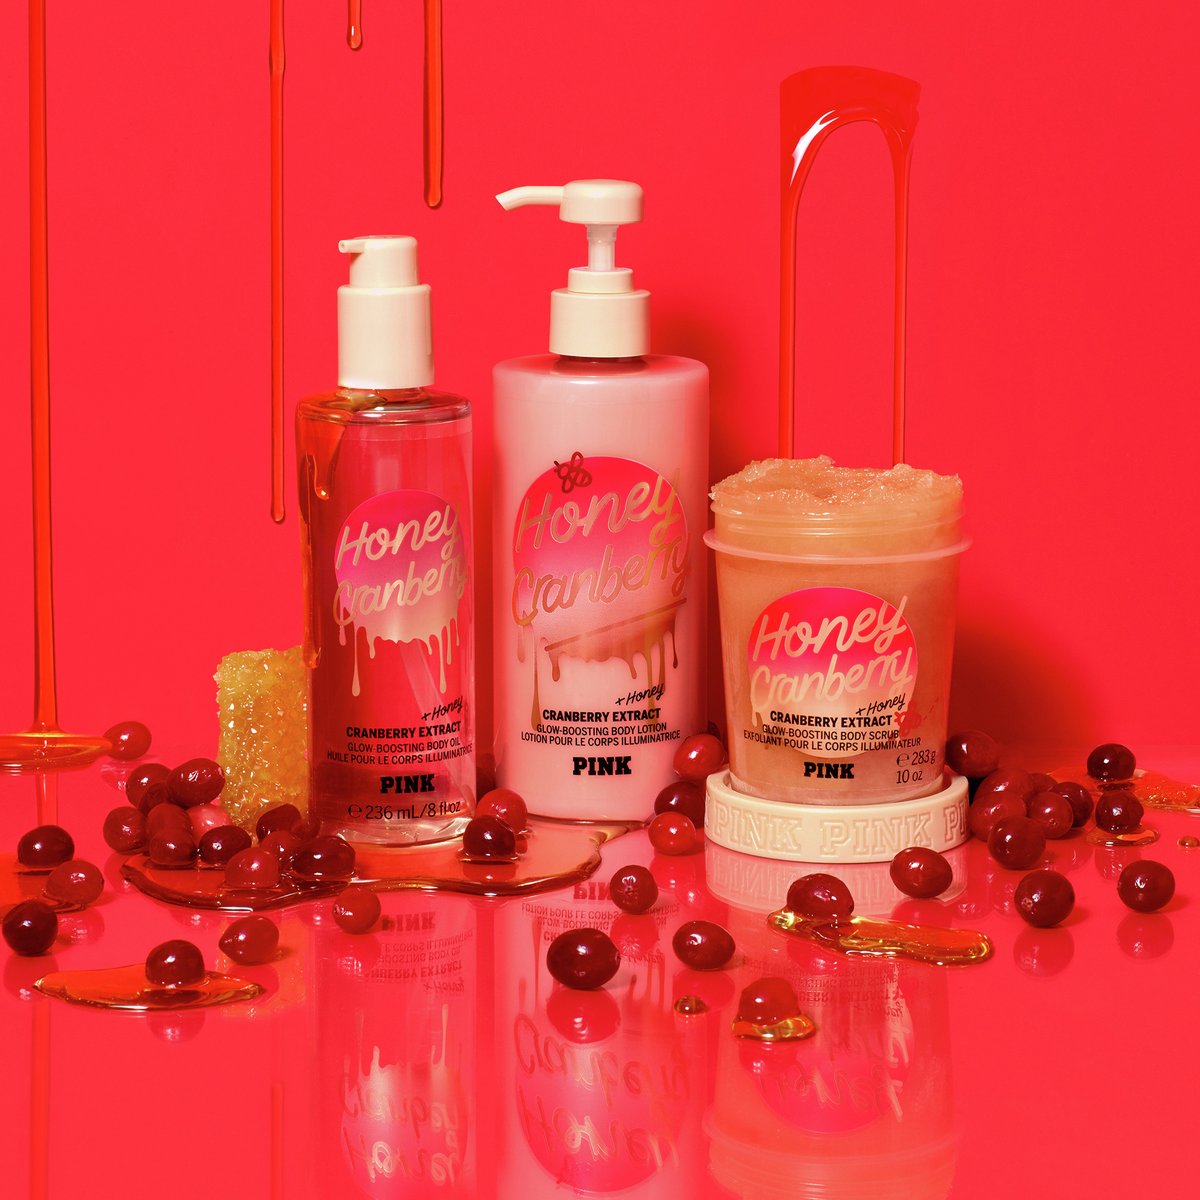 Glisten up y'all! 📣 #PINKBty did it again with NEW Honey Cranberry! With juicy super berries and sparkling honey, this scent is destined to be your new holiday fave!